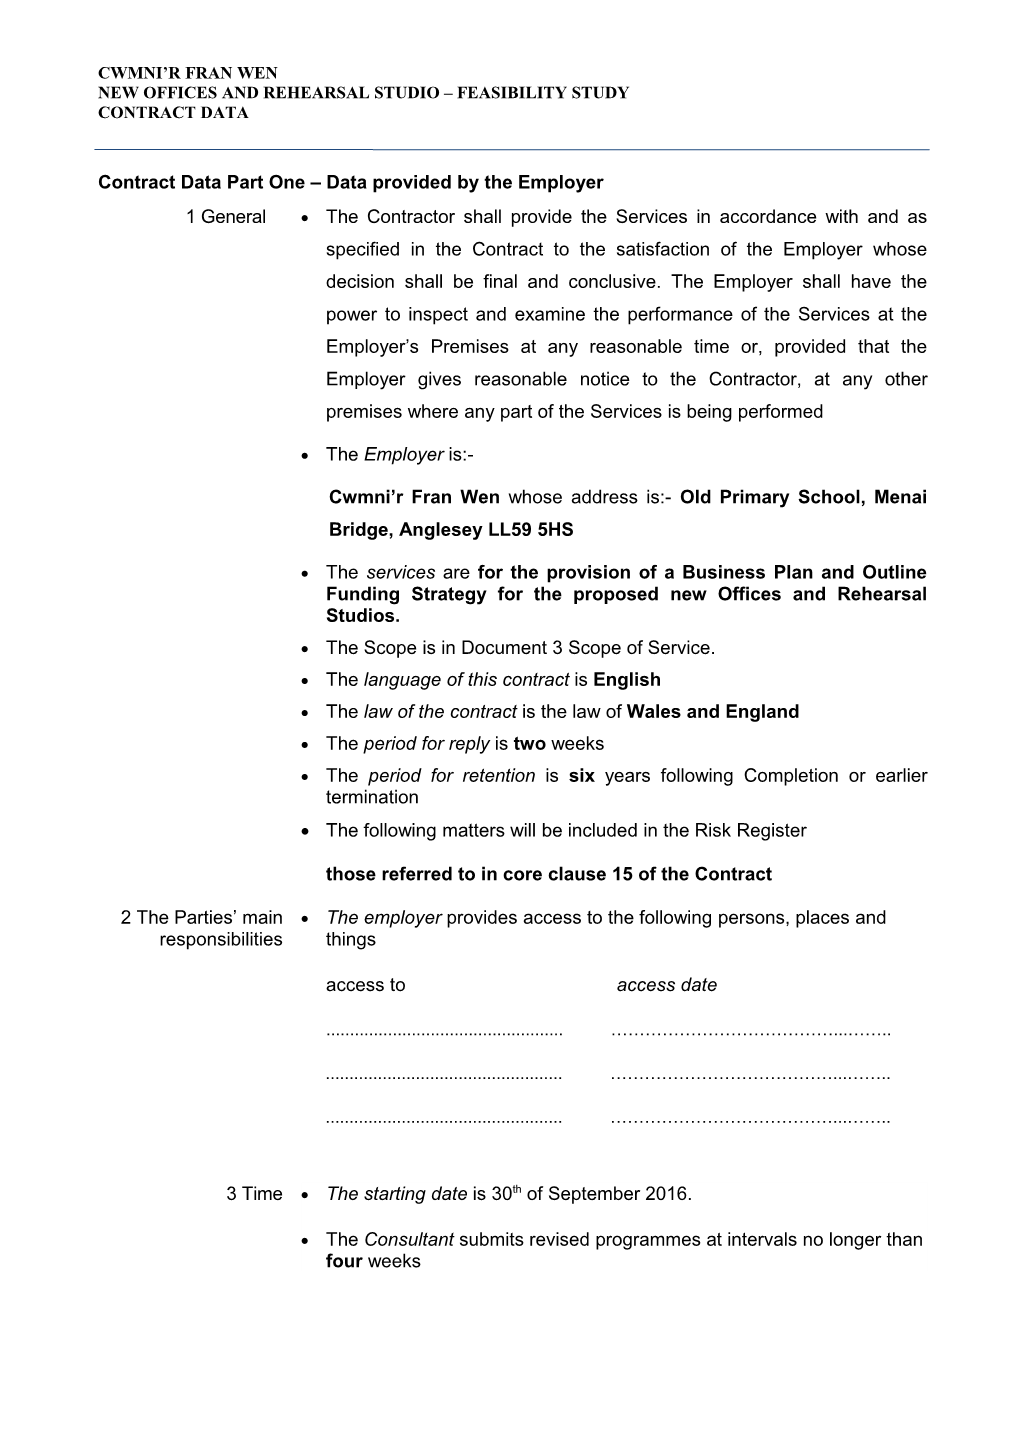 Tender Documents for the Appointment of A